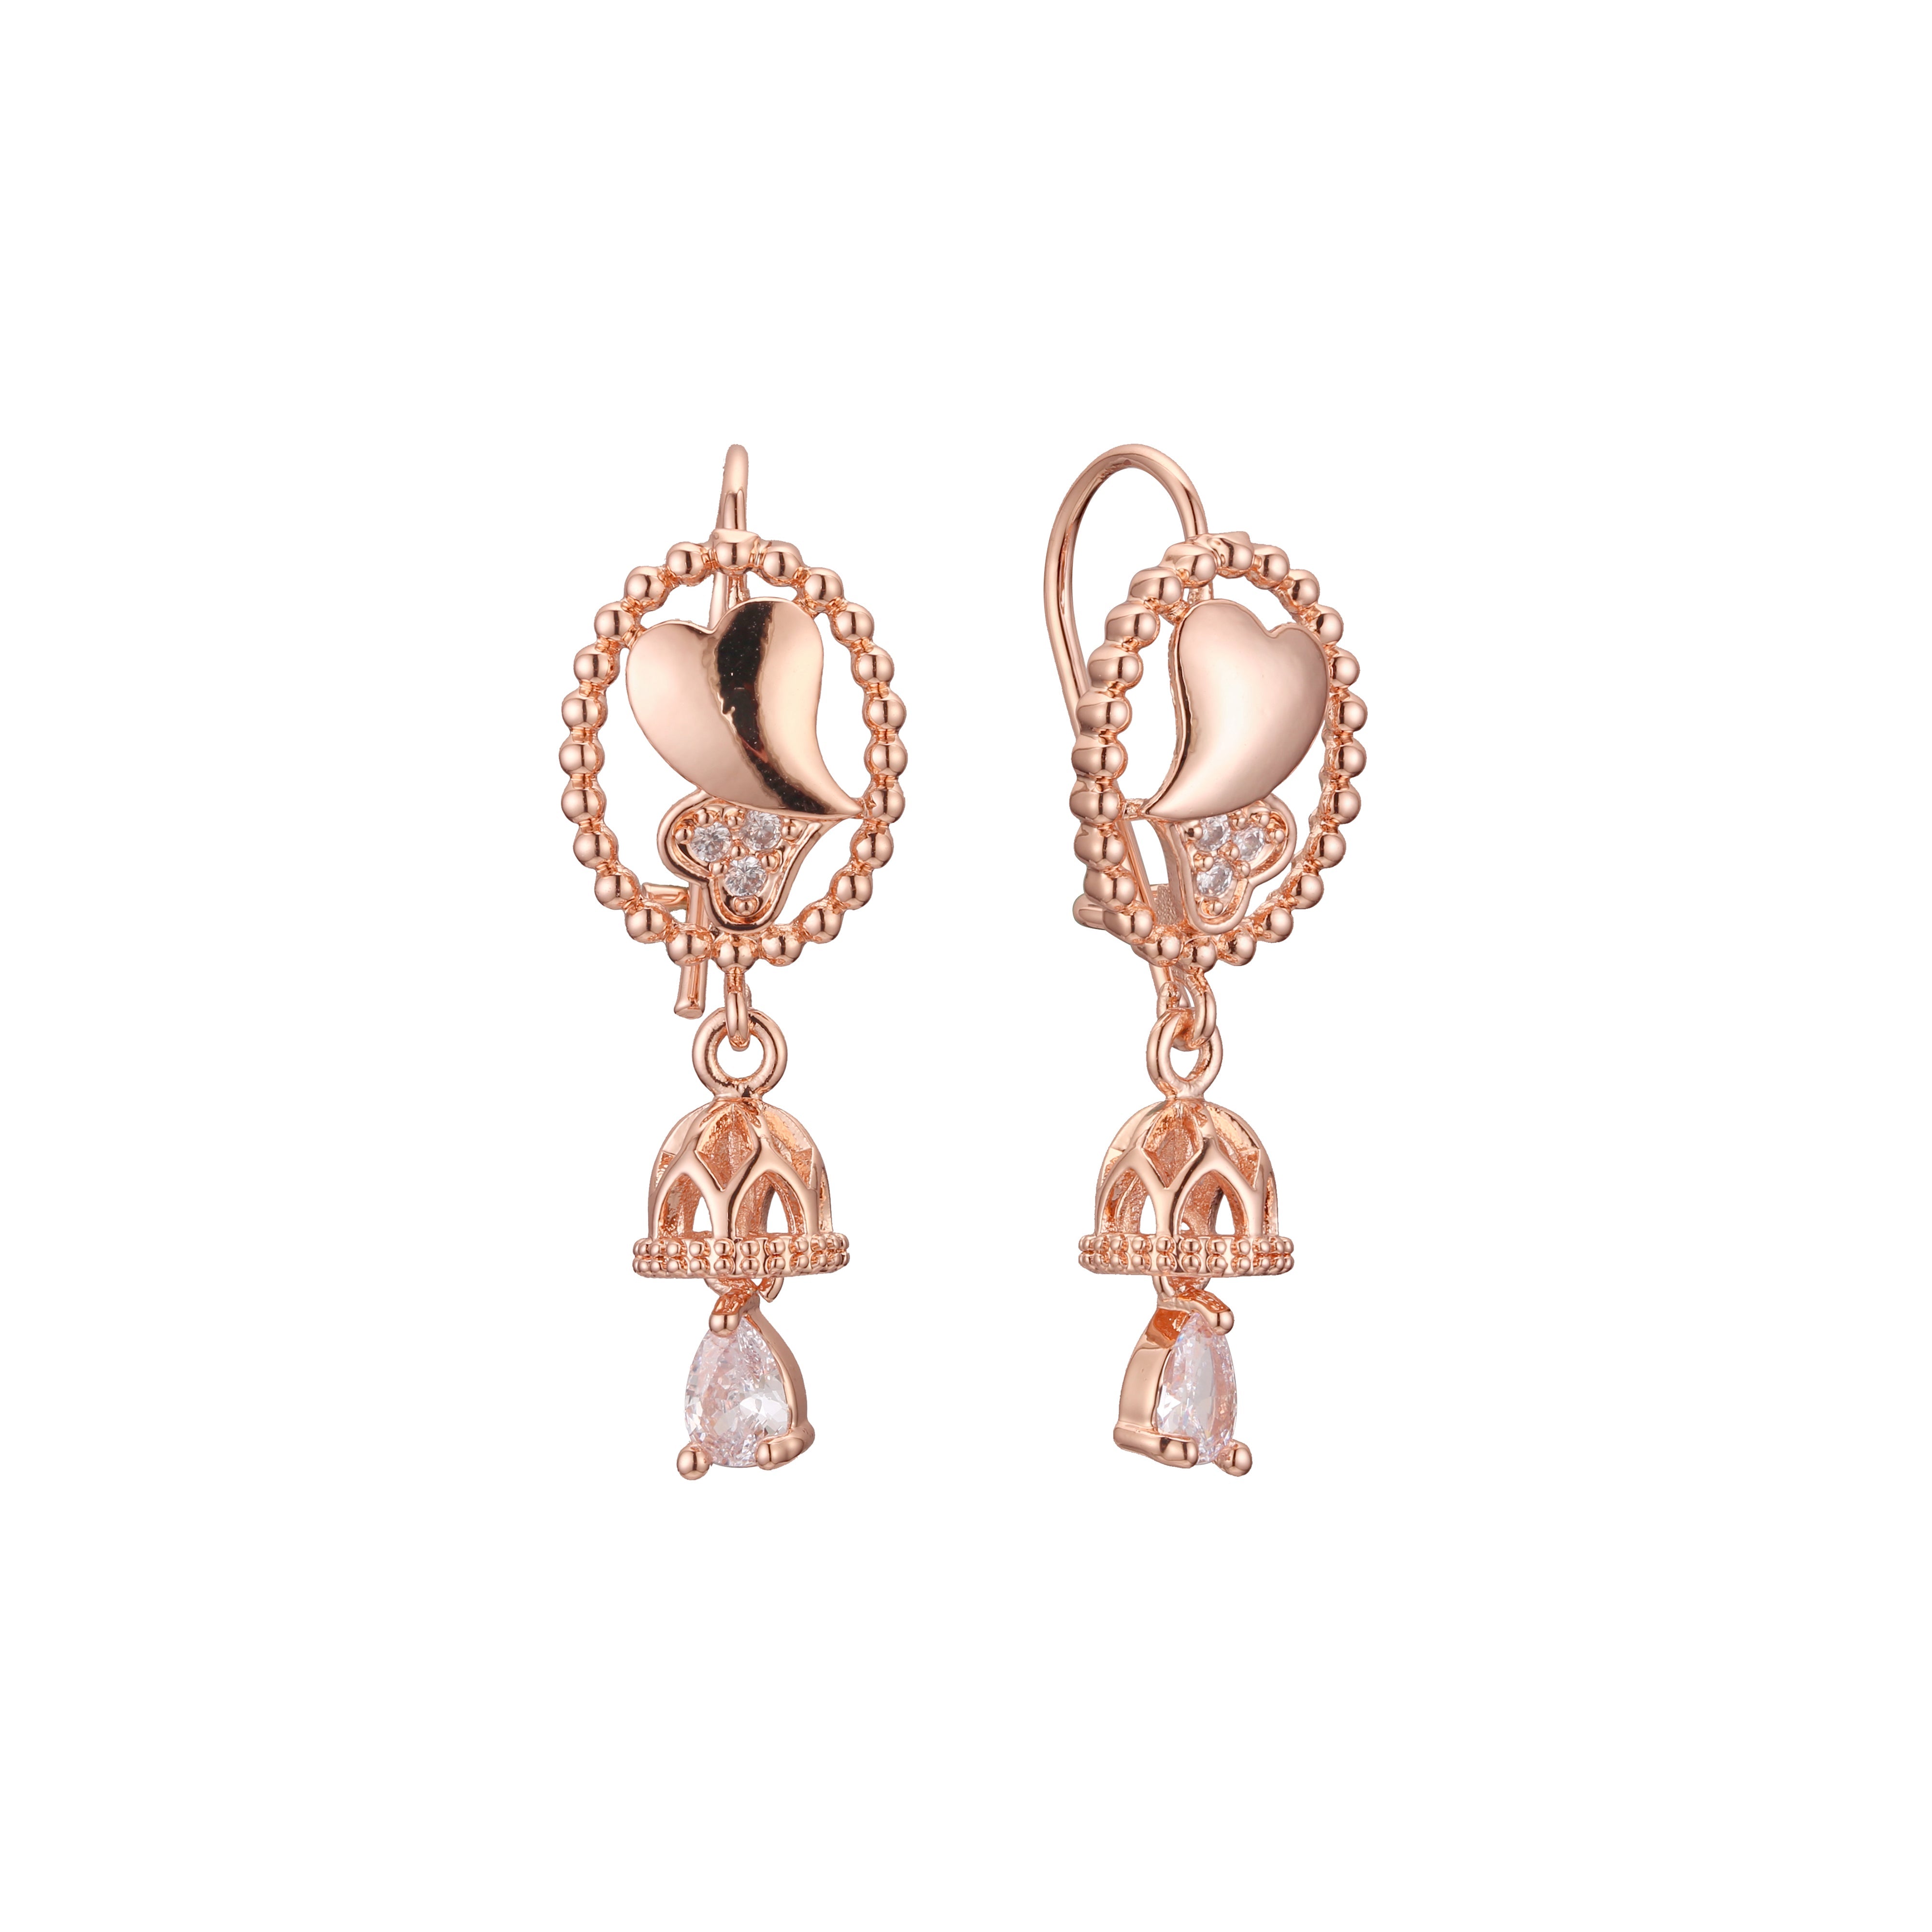 Wire hook beads cluster chandelier drop earrings in 14K Gold, Rose Gold plating colors